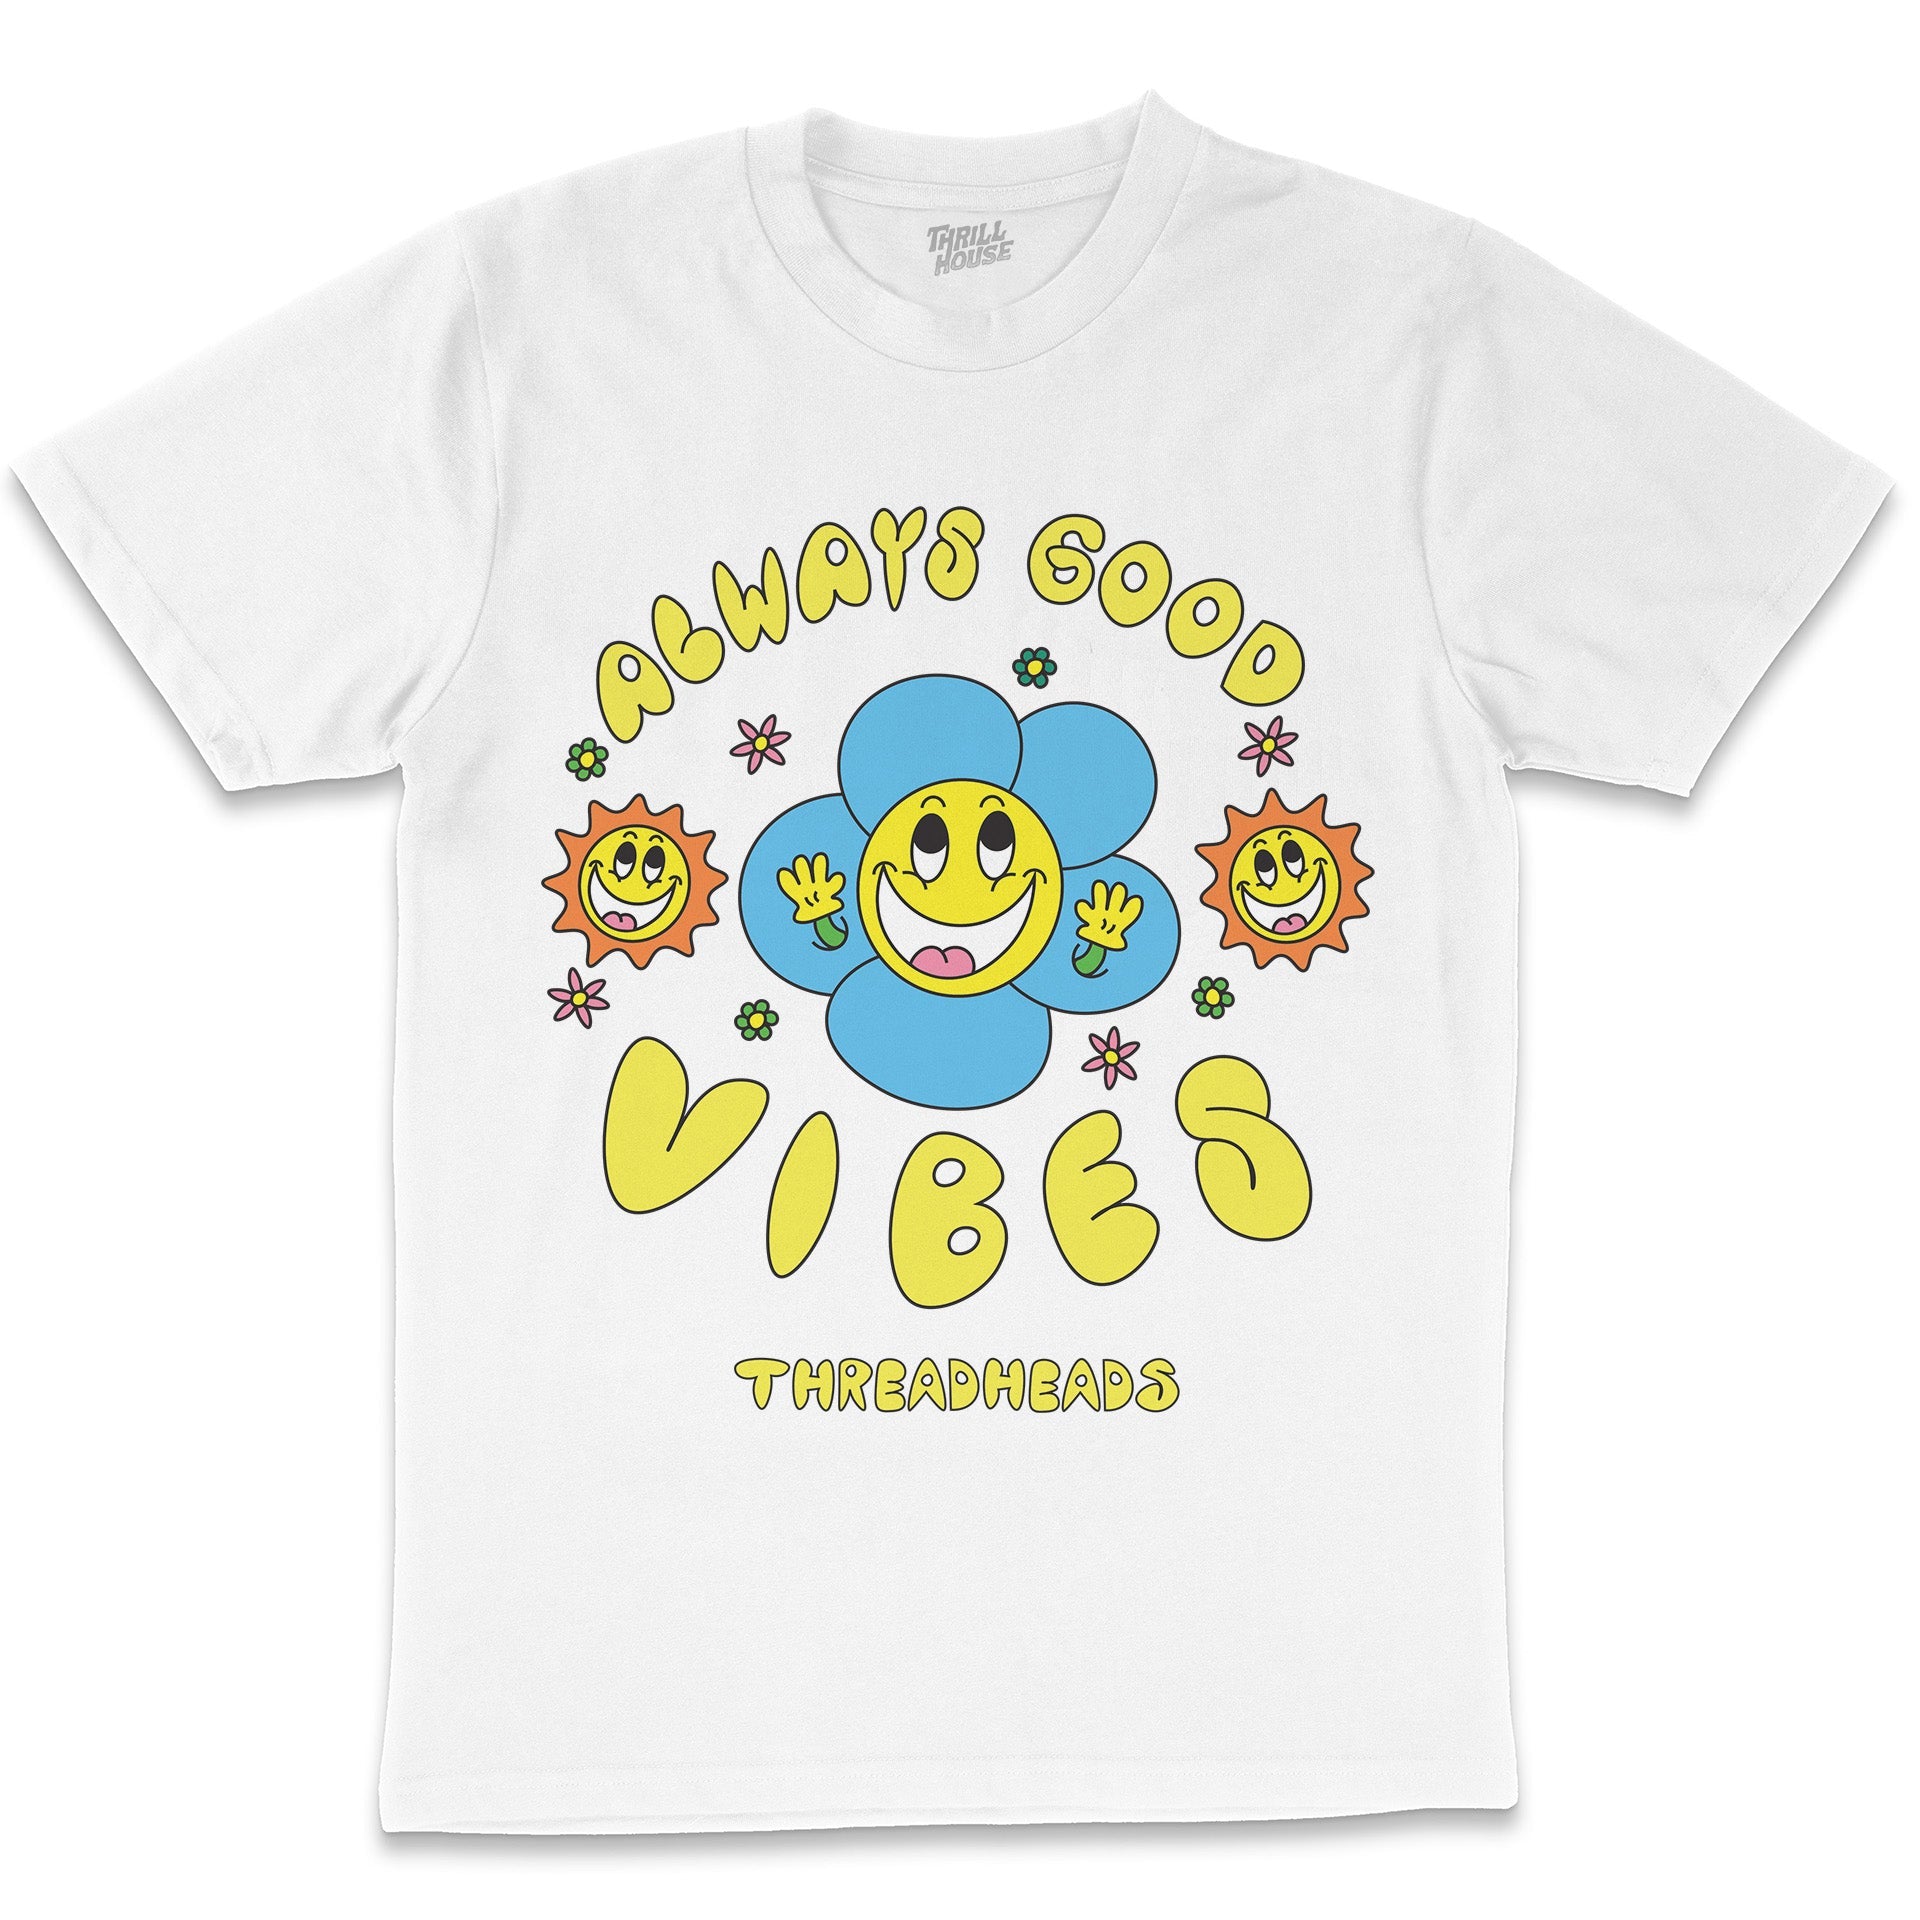 Always Good Vibes Emotion Mental Healthy Positive Flower Nature Hippy Cool Chilled Cotton T-Shirt